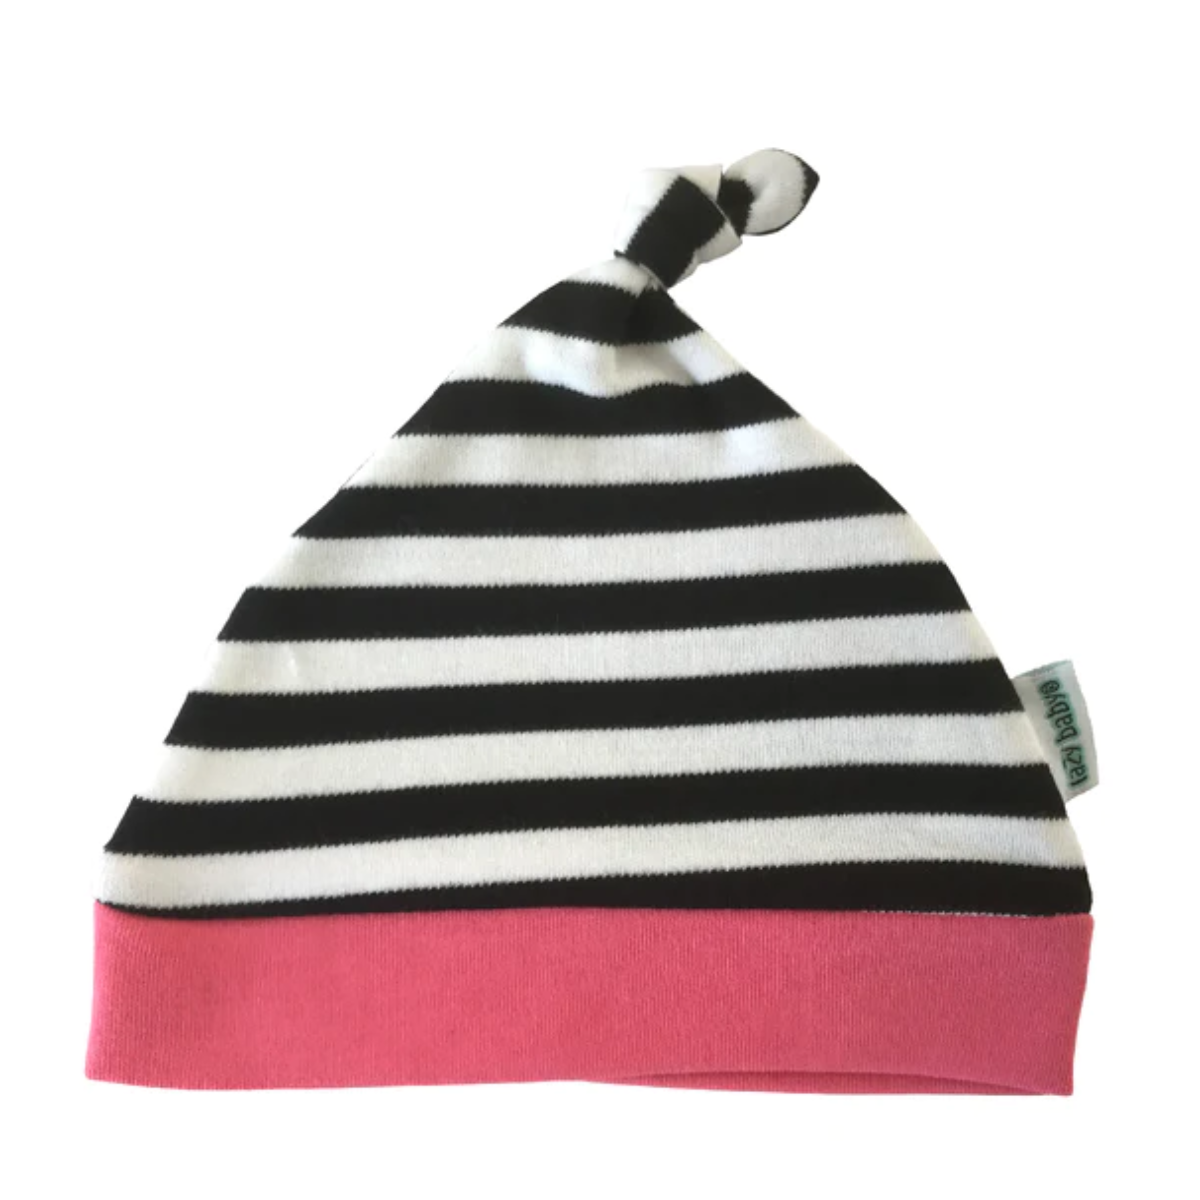 Black and white stripy hat with pink edge trim and knot detail